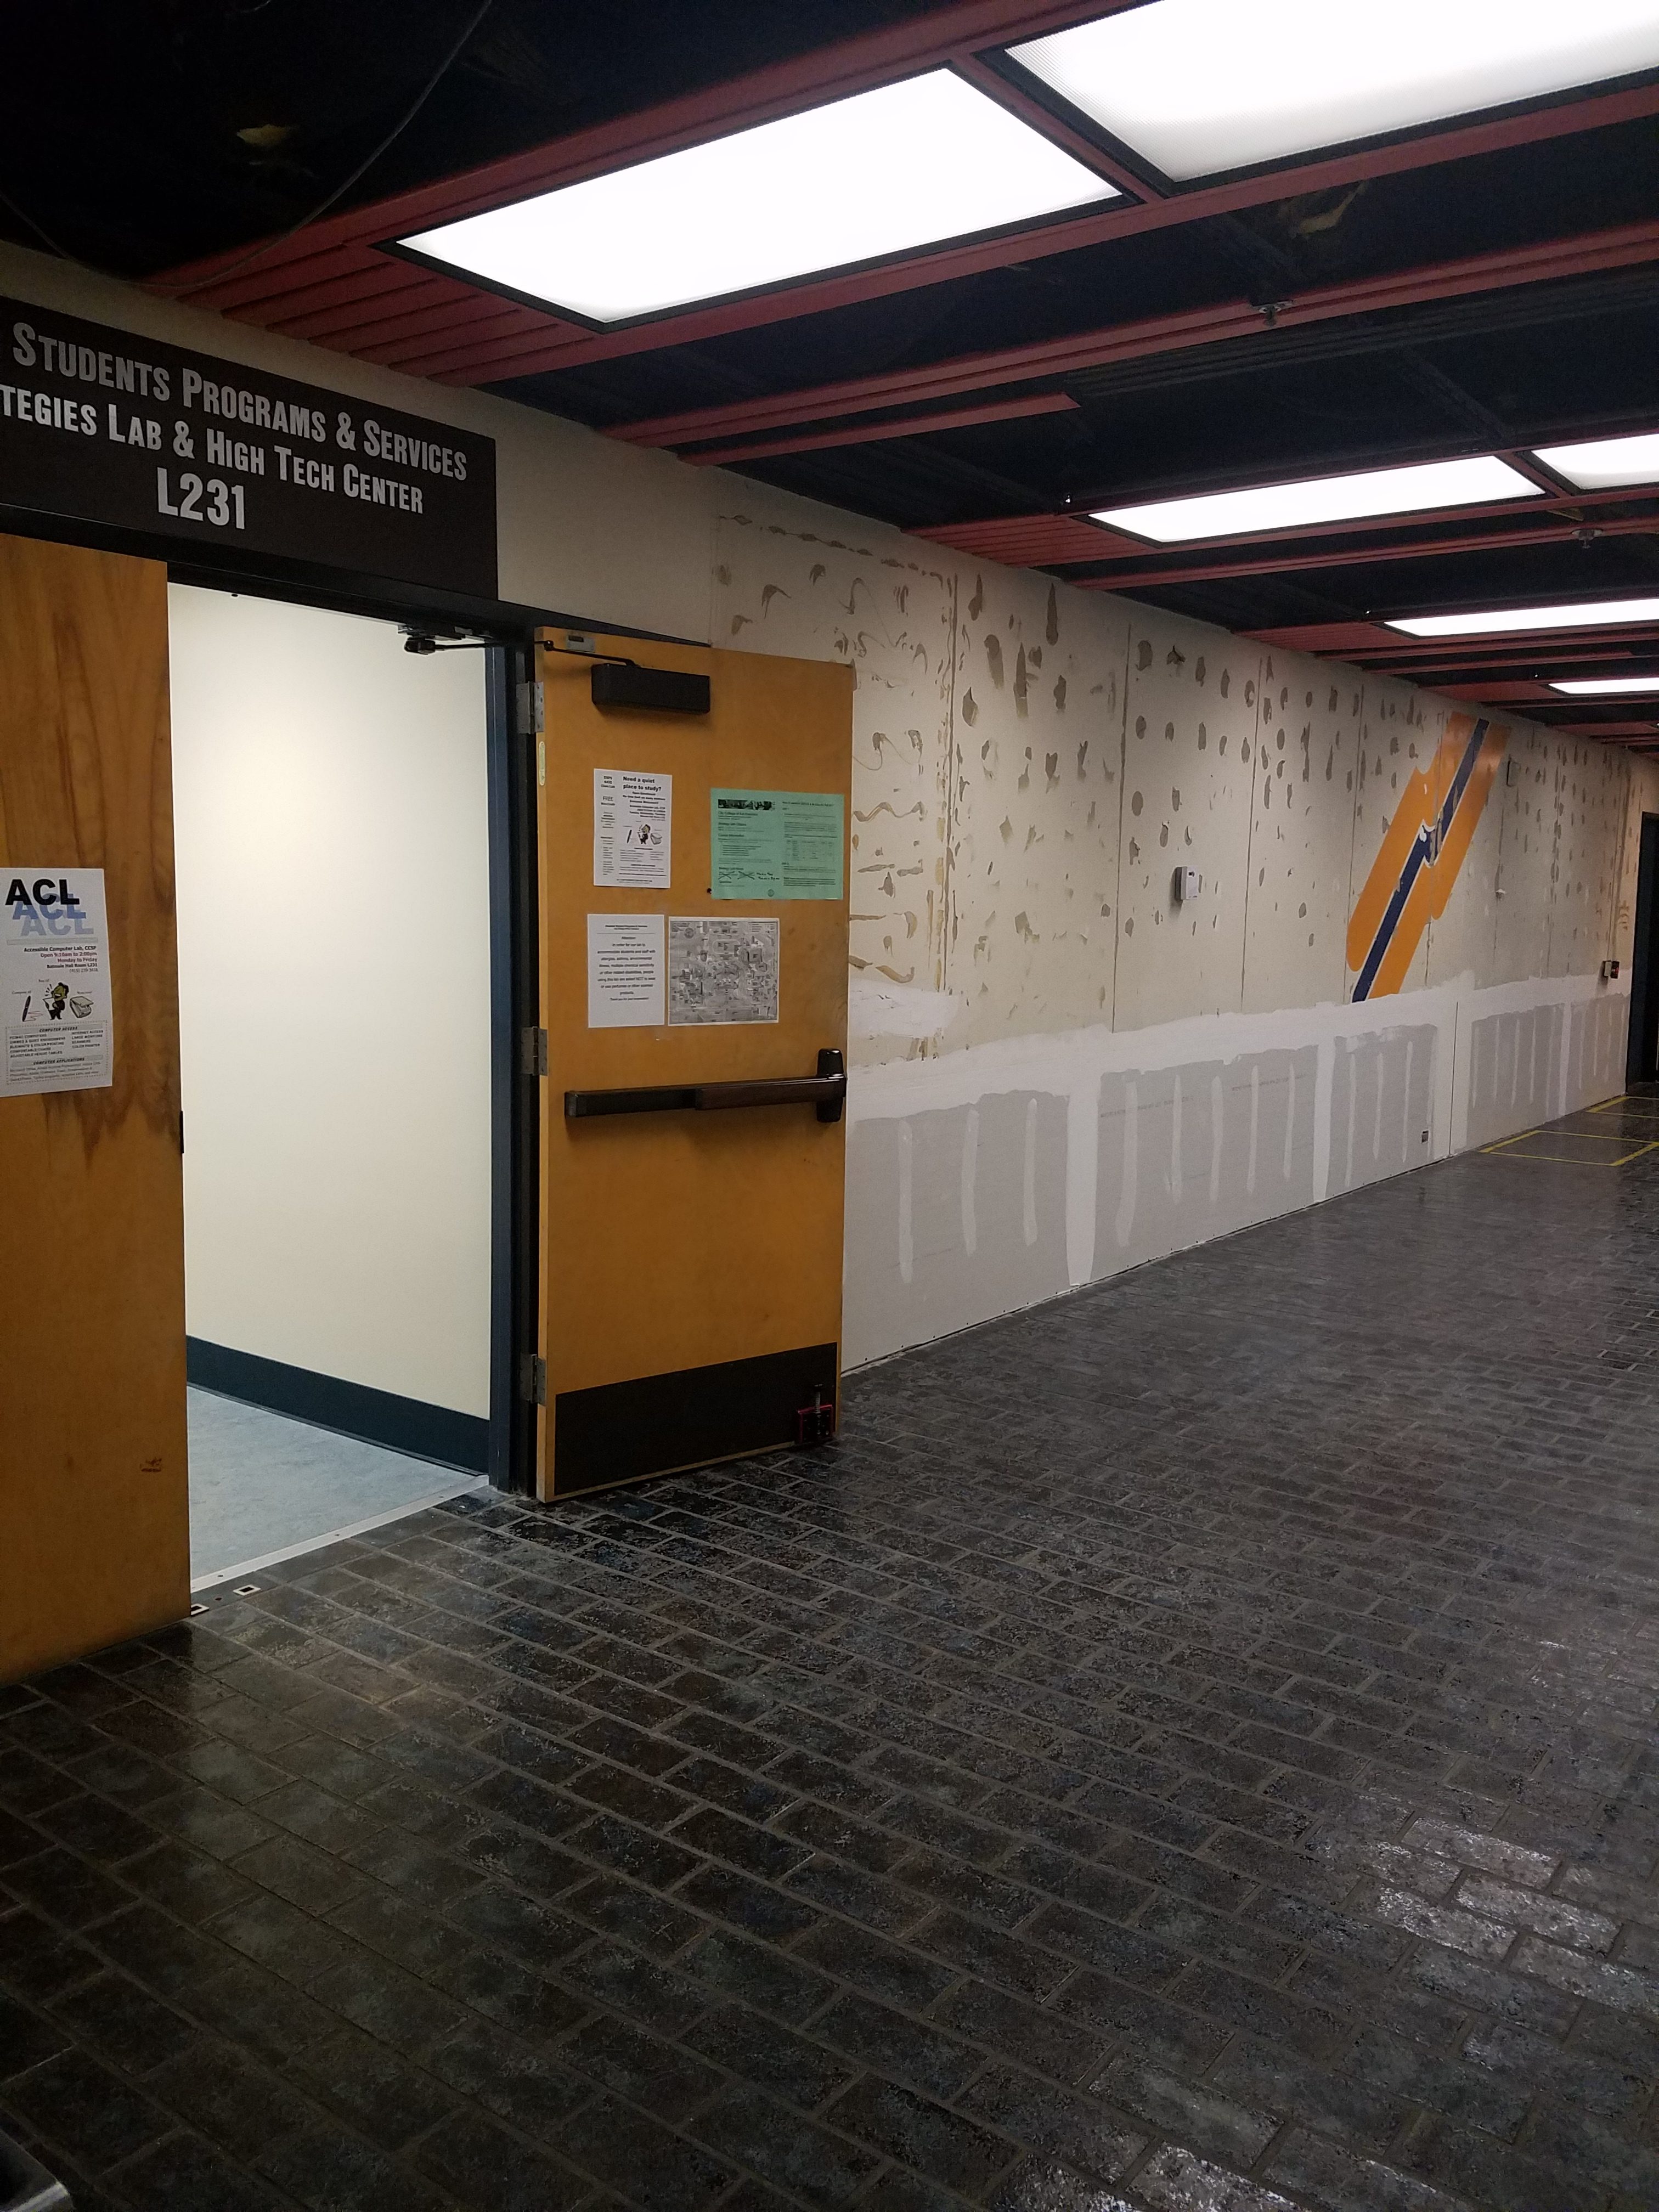 The third and fourth floor of the Batmale Hall were flooded with hot water due to a faucet vacuum breaker. Faculty offices and classes were relocated during repairs. Photo taken by Bethaney Lee on Oct. 10, 2017.